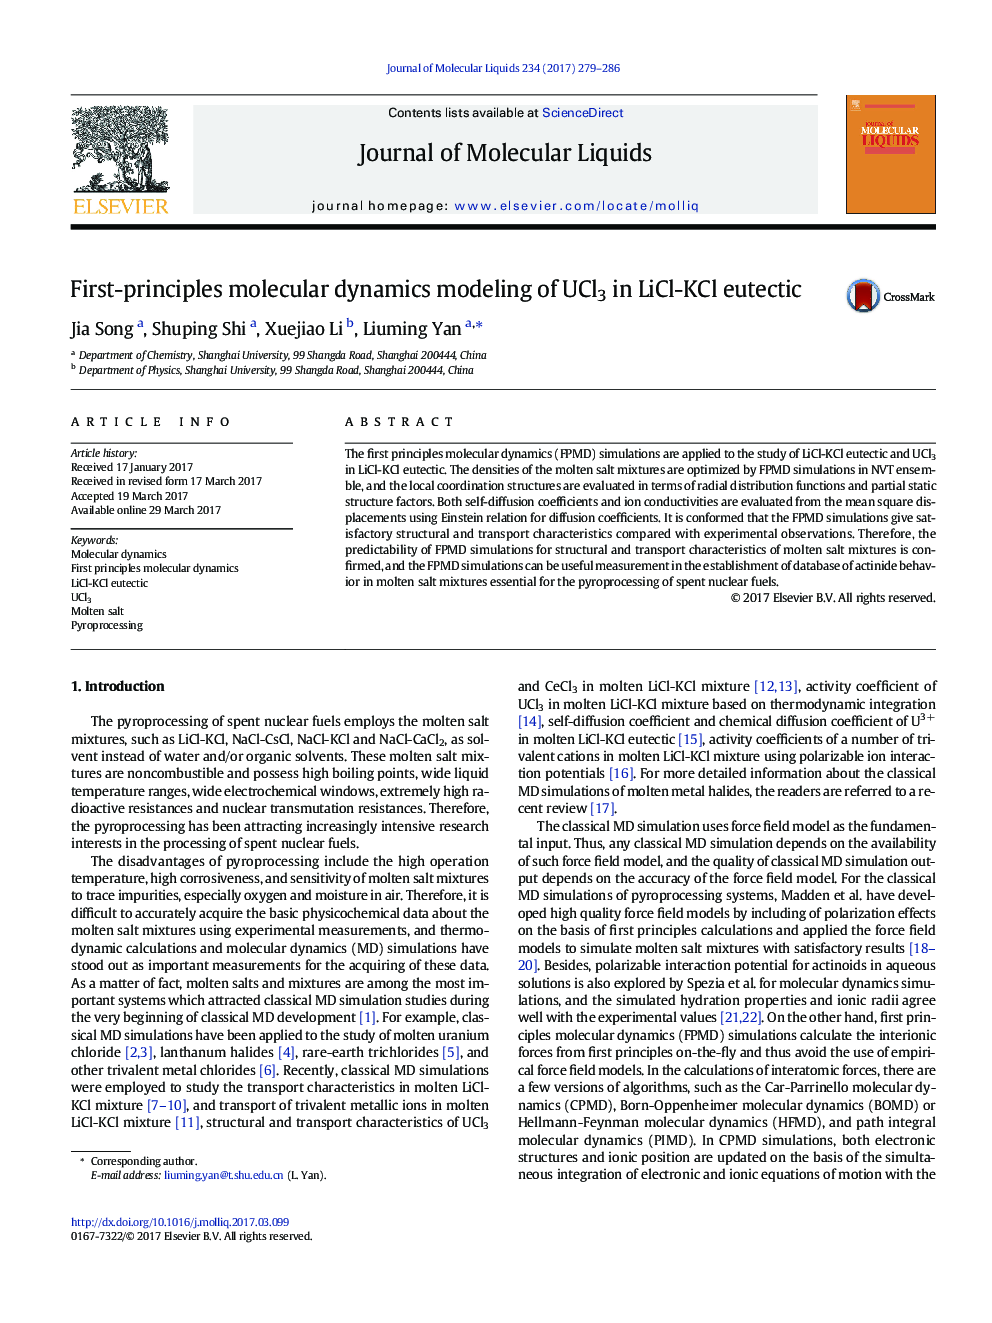 First-principles molecular dynamics modeling of UCl3 in LiCl-KCl eutectic